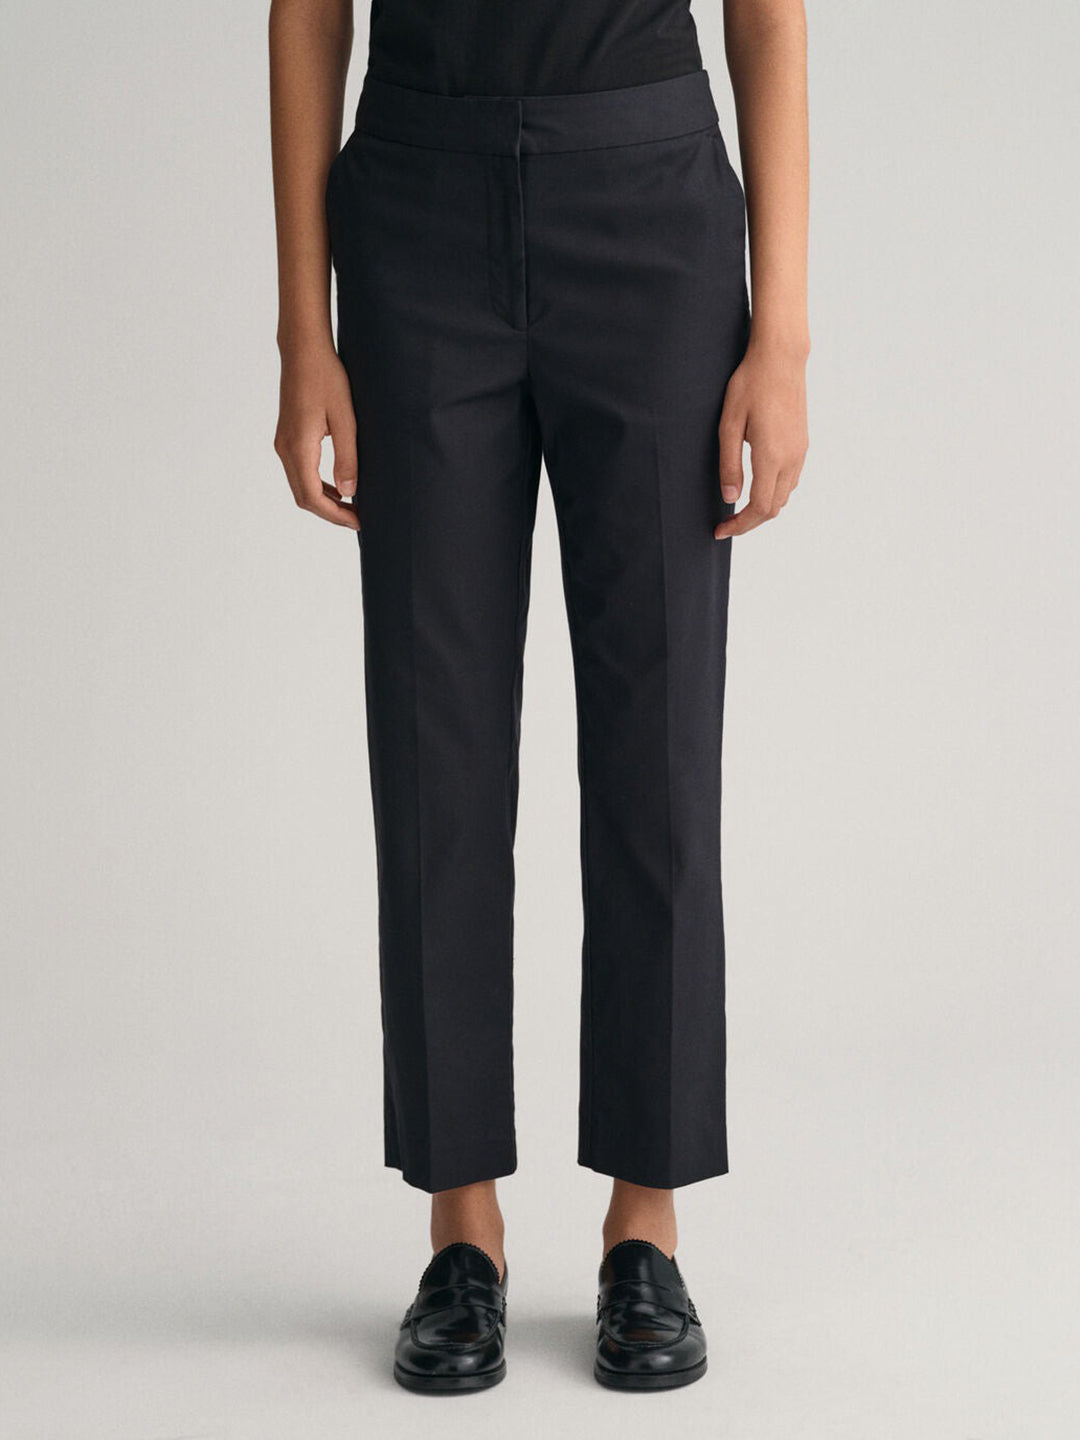 Jersey Checked Slim Fit Trousers | M&S Collection | M&S